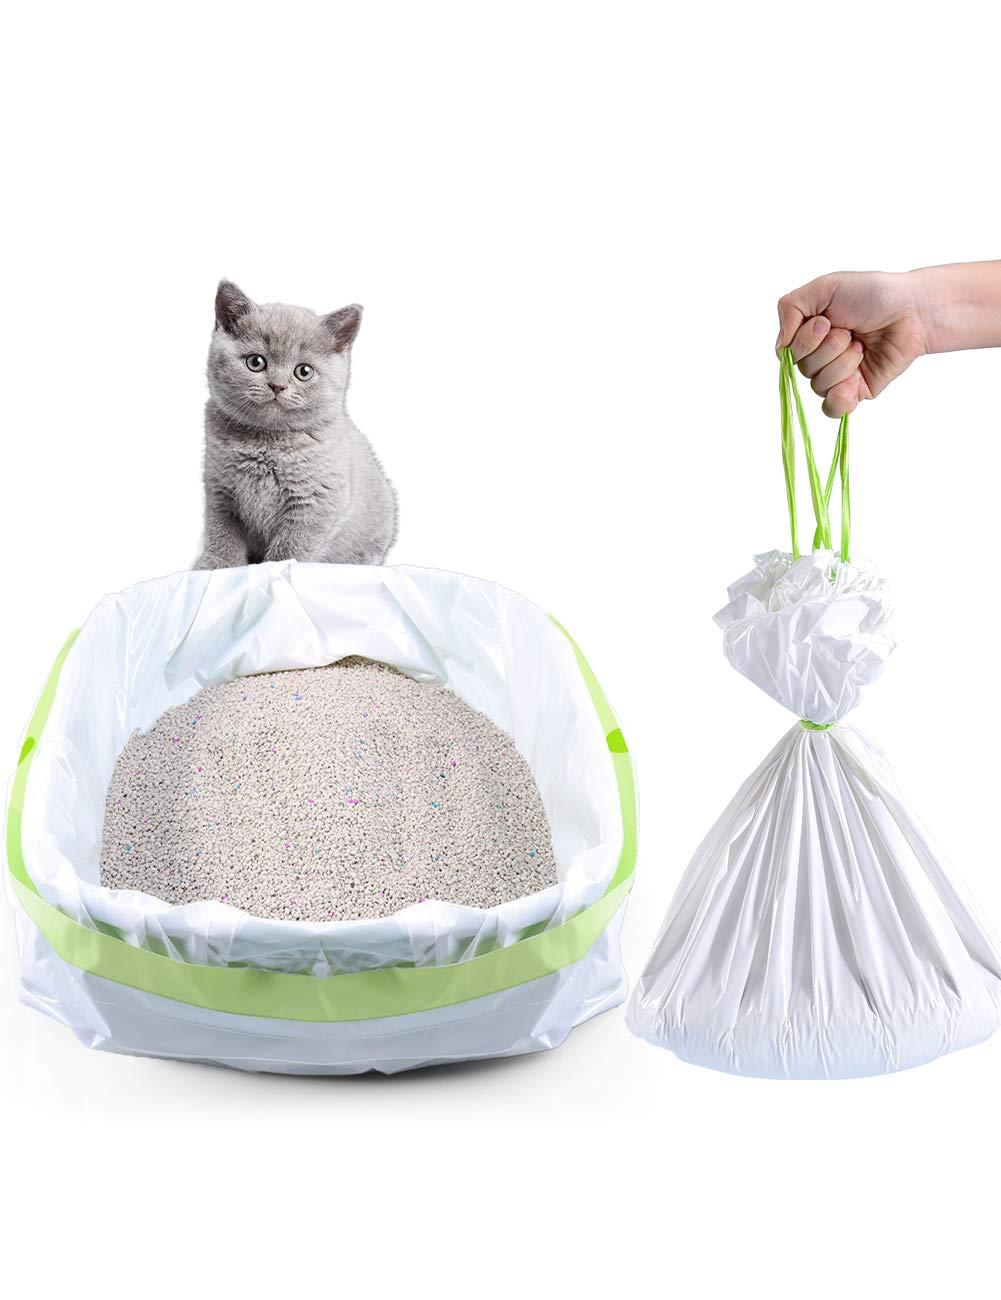 PETOCAT Litter Box Liners, 34 Count Jumbo Cat Litter Pan liners, Drawstring Litter Liner Bags For Litter Box, Easy Clean Up. Thick Large Kitty Litter Liner XL, Eco Friendly Pet Cat Supplies(36\\\